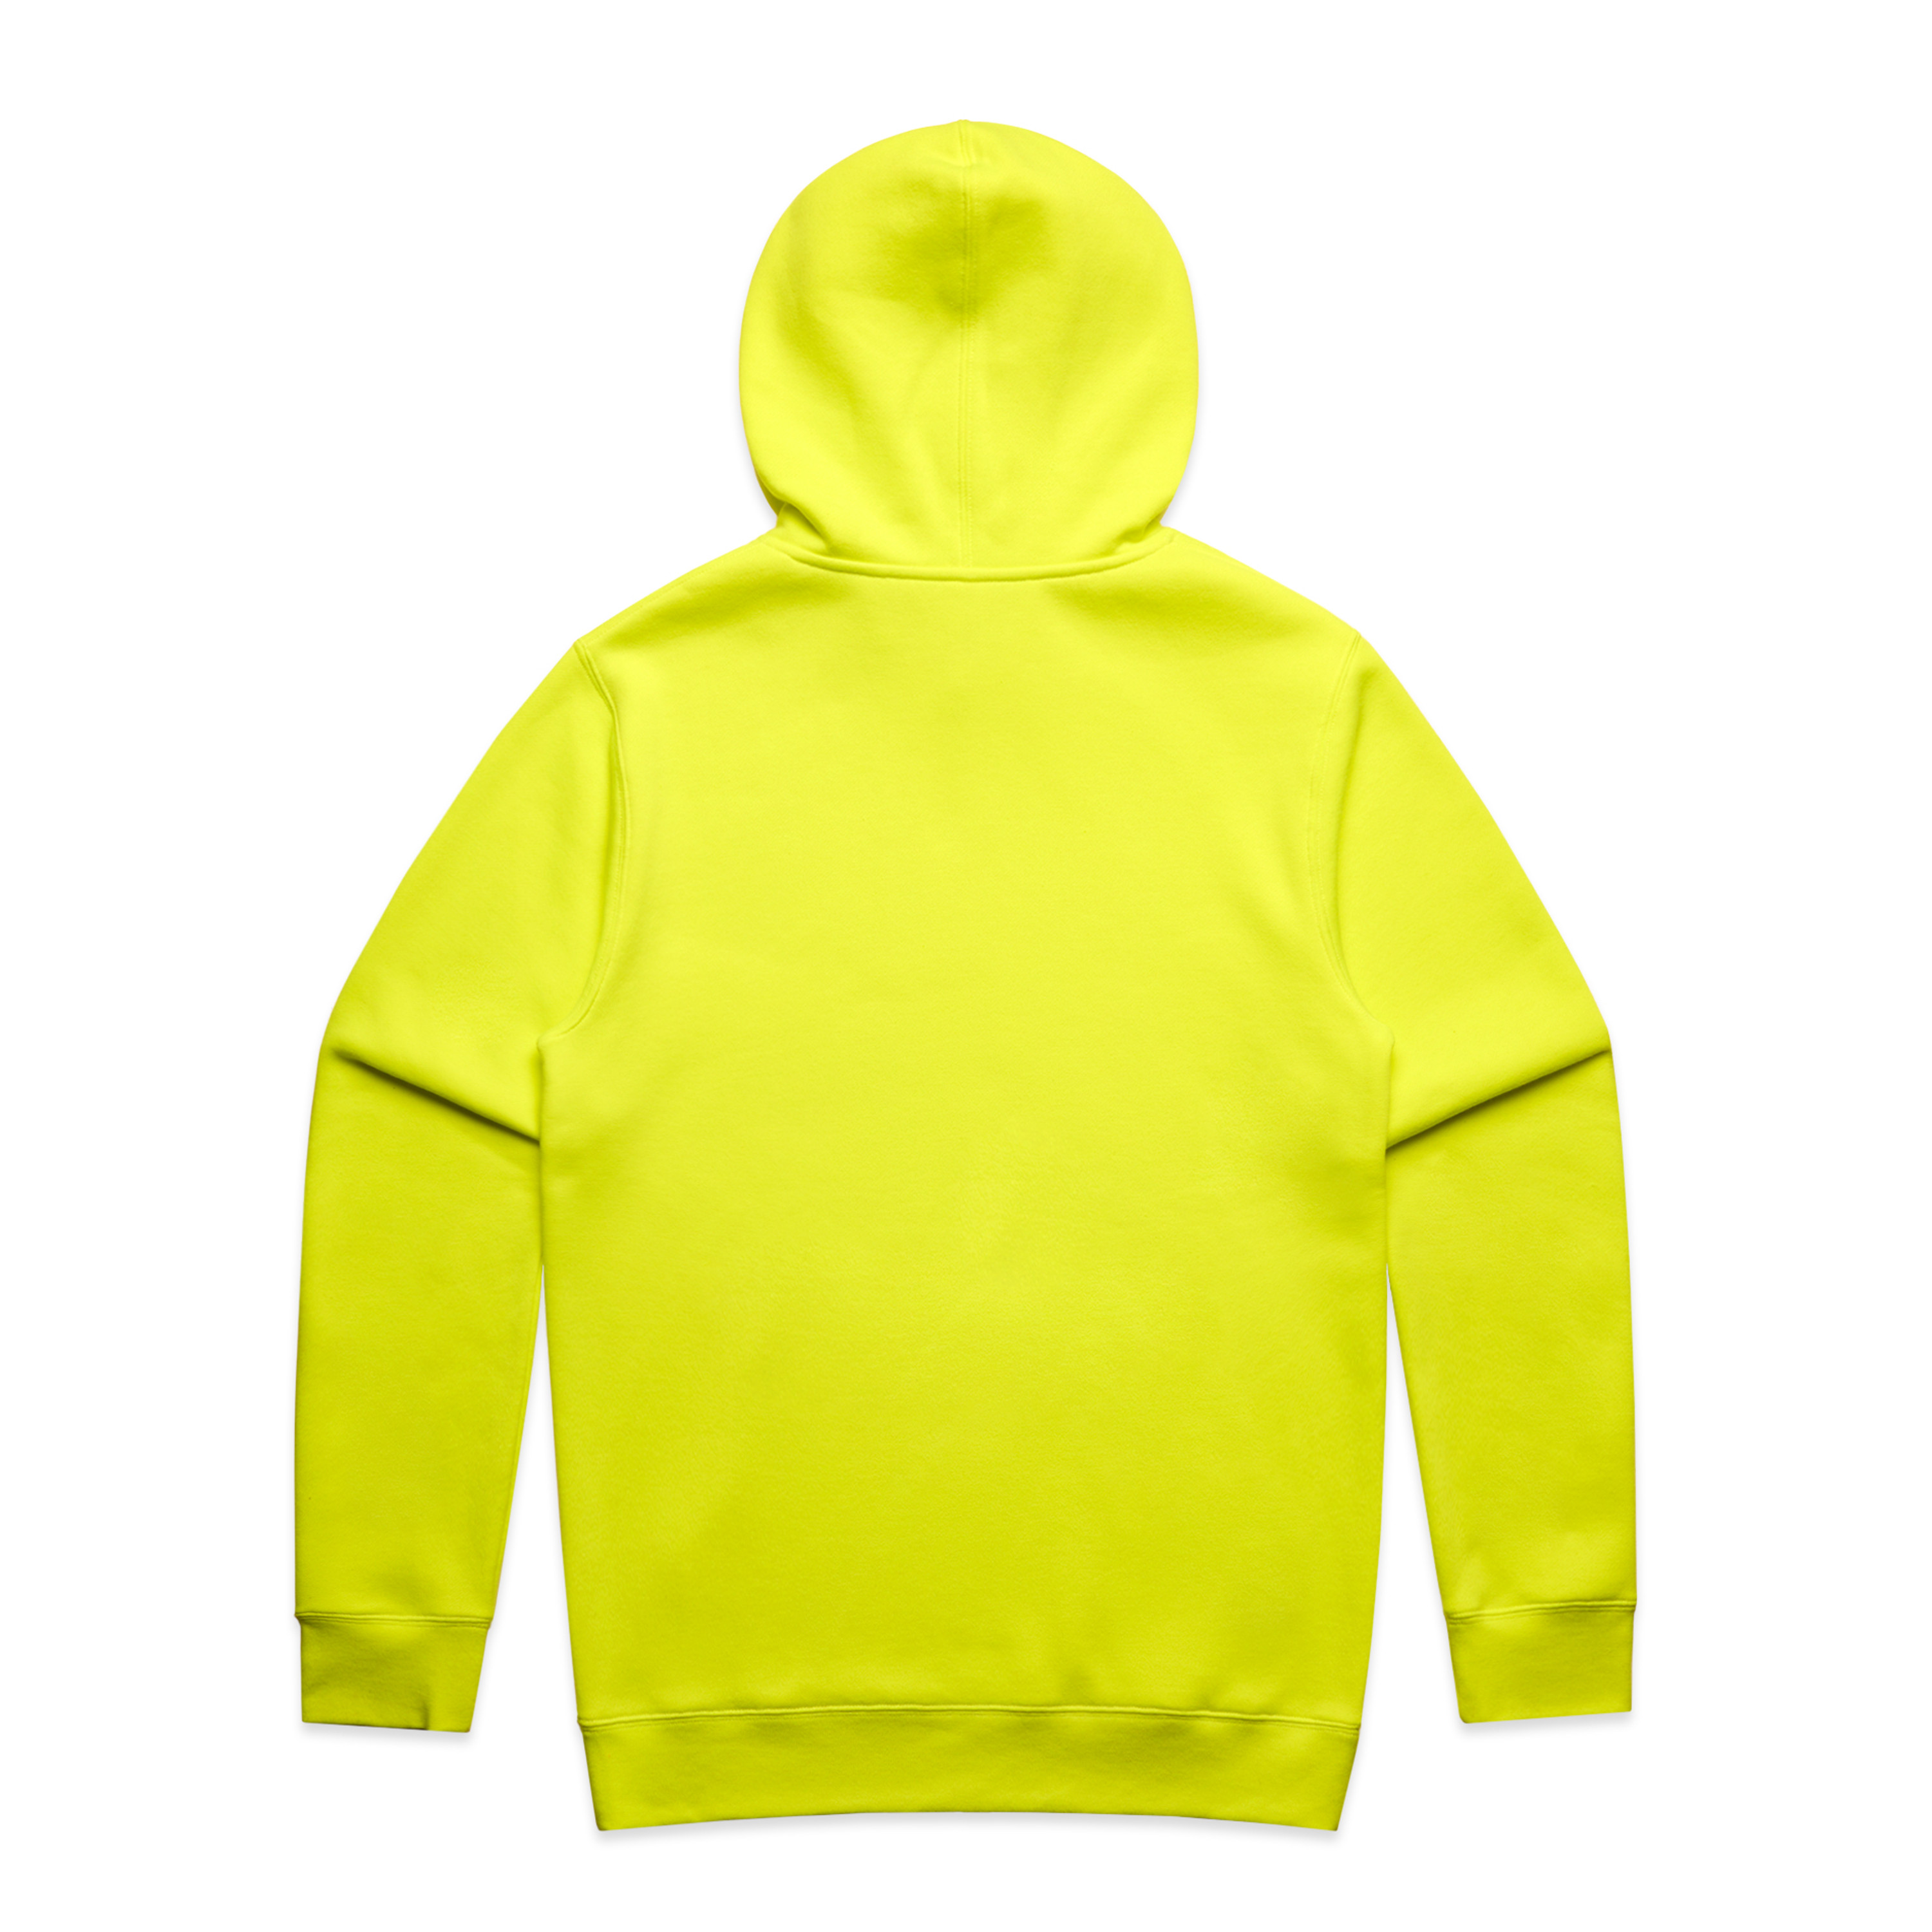 SAFETY YELLOW - BACK